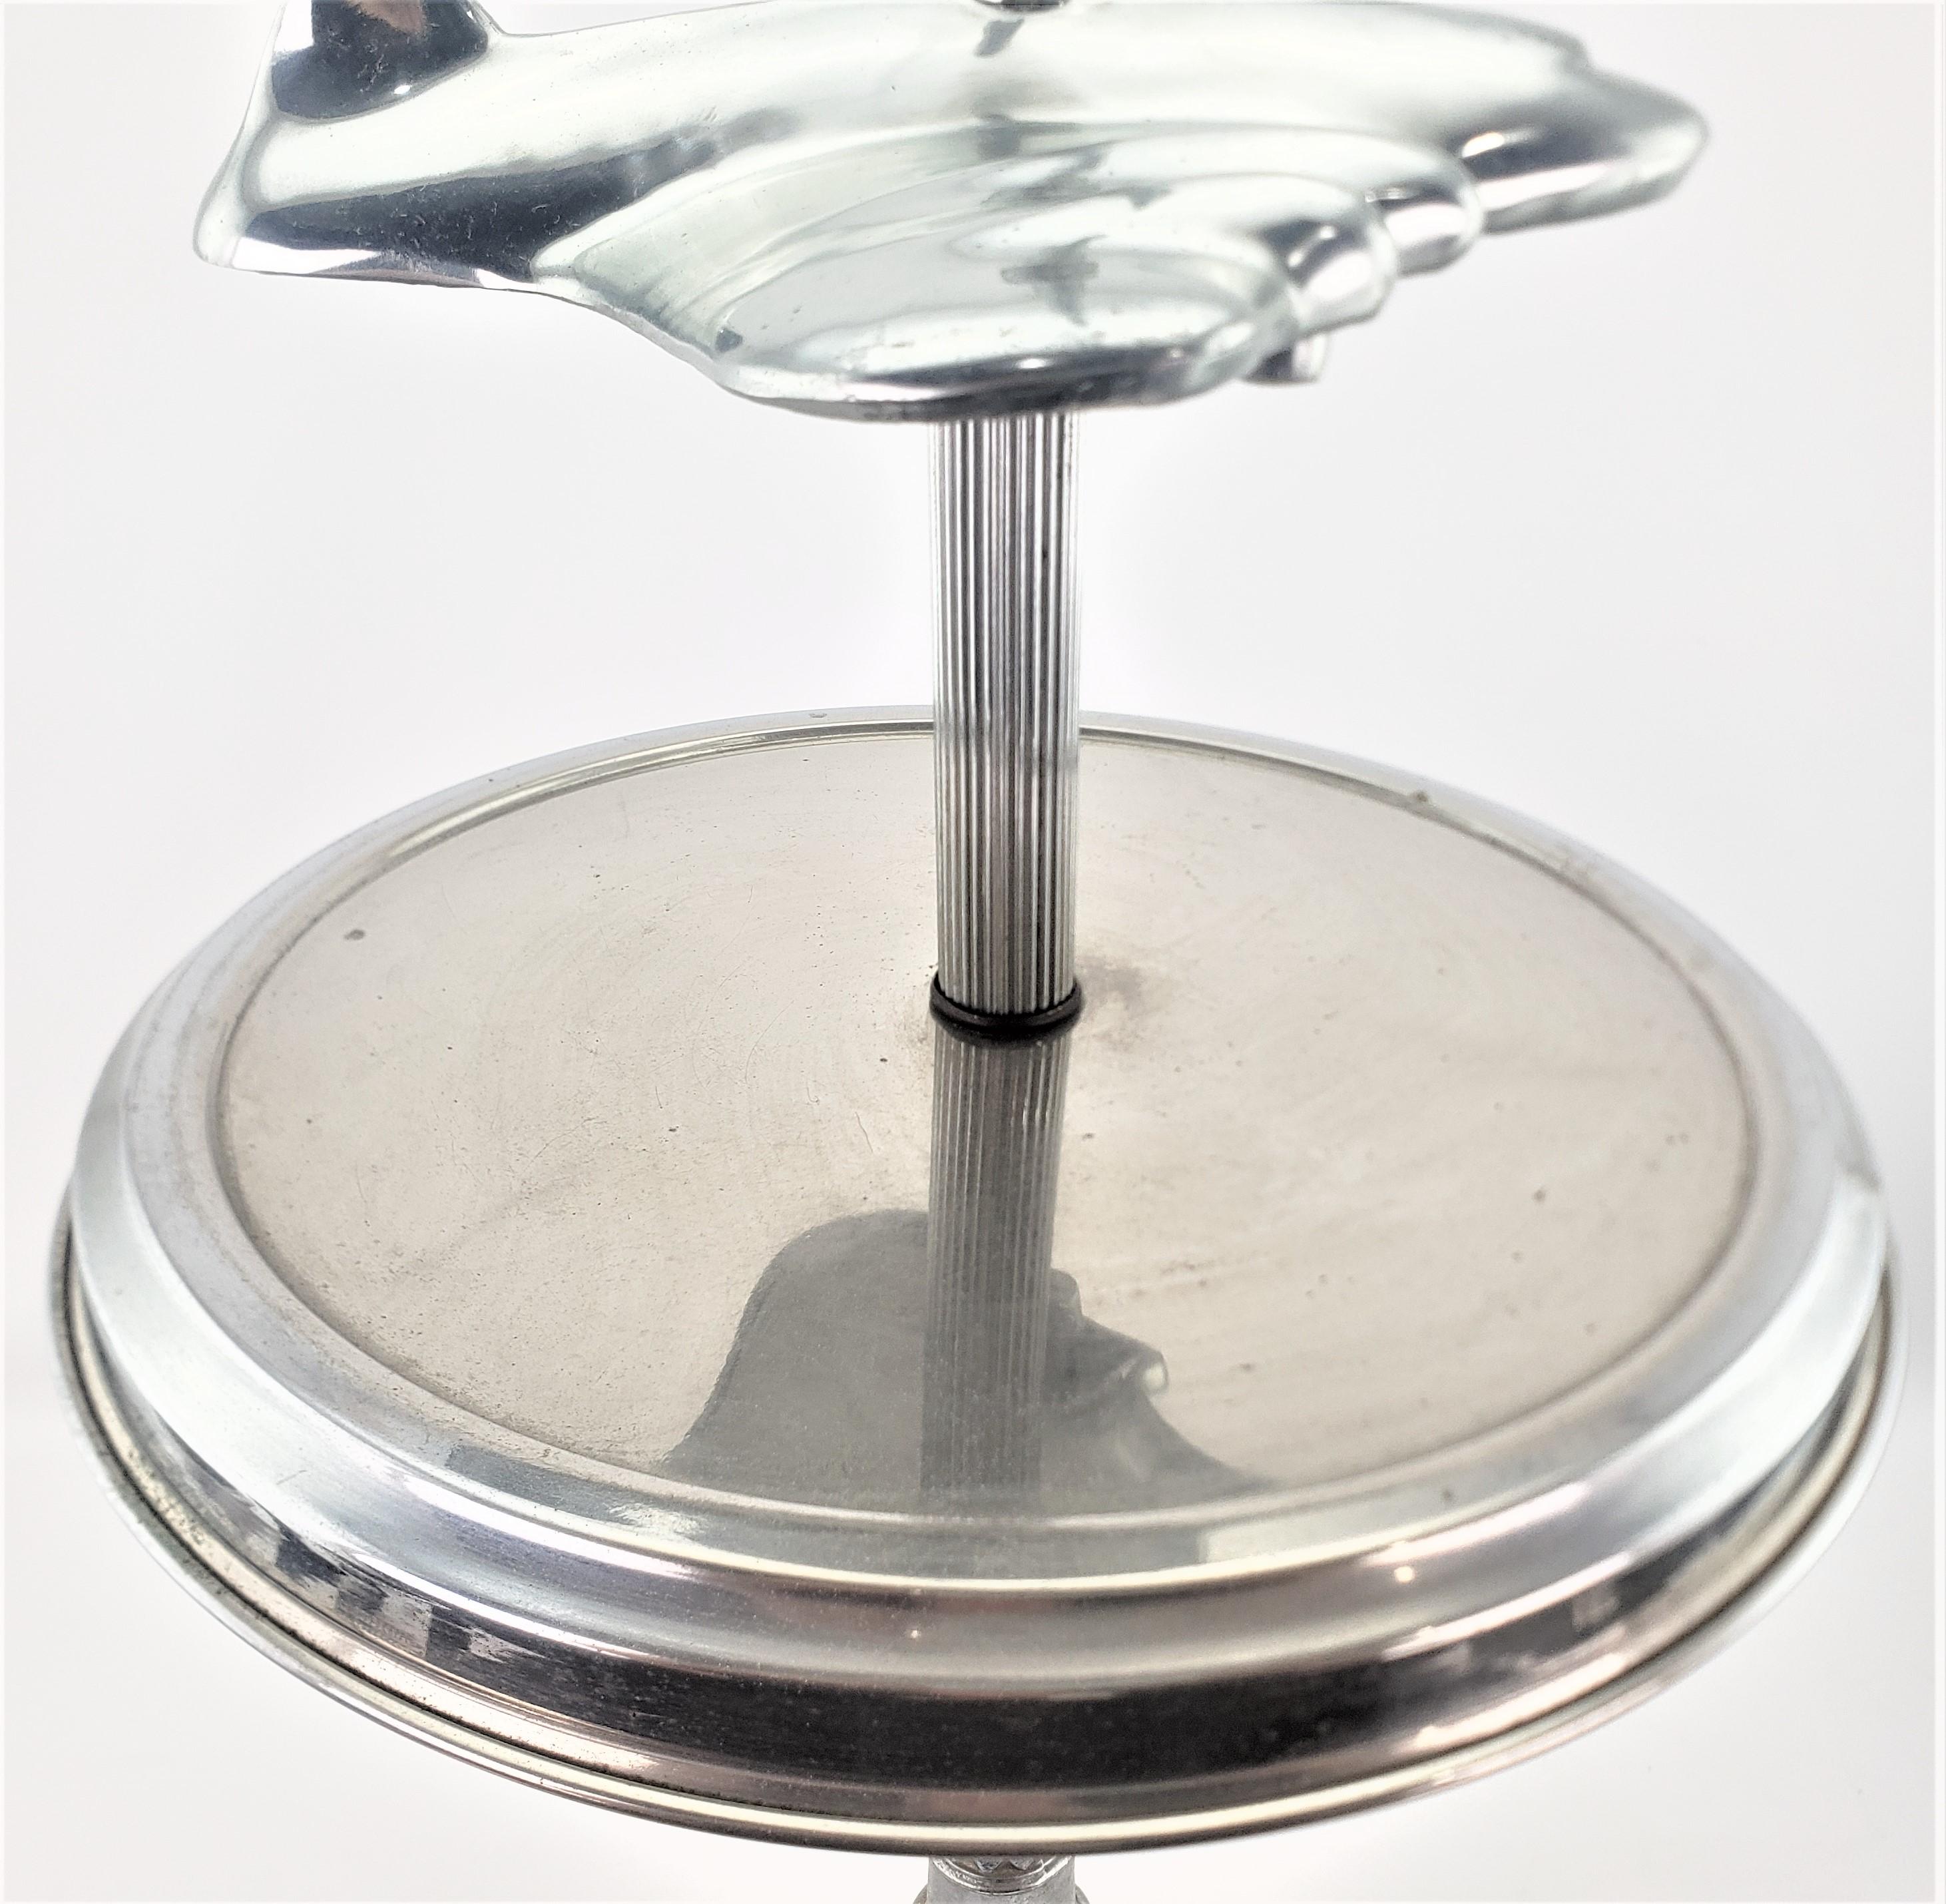 Unique Art Deco Styled Chrome Jet Airplane Lighted Smoker's Stand or Table For Sale 2